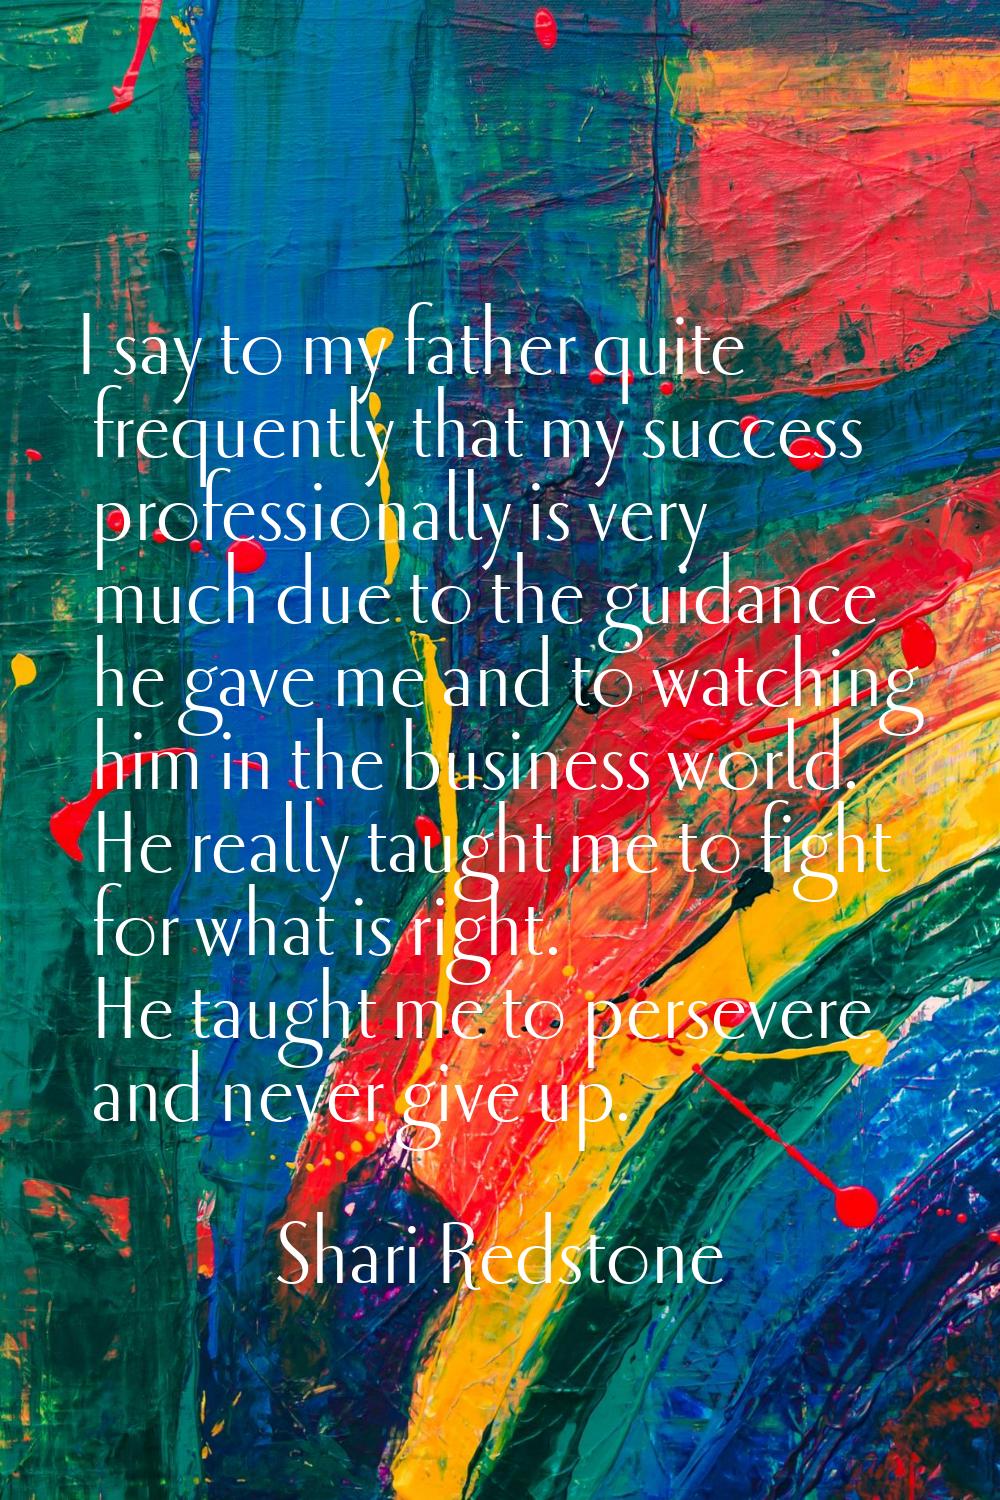 I say to my father quite frequently that my success professionally is very much due to the guidance